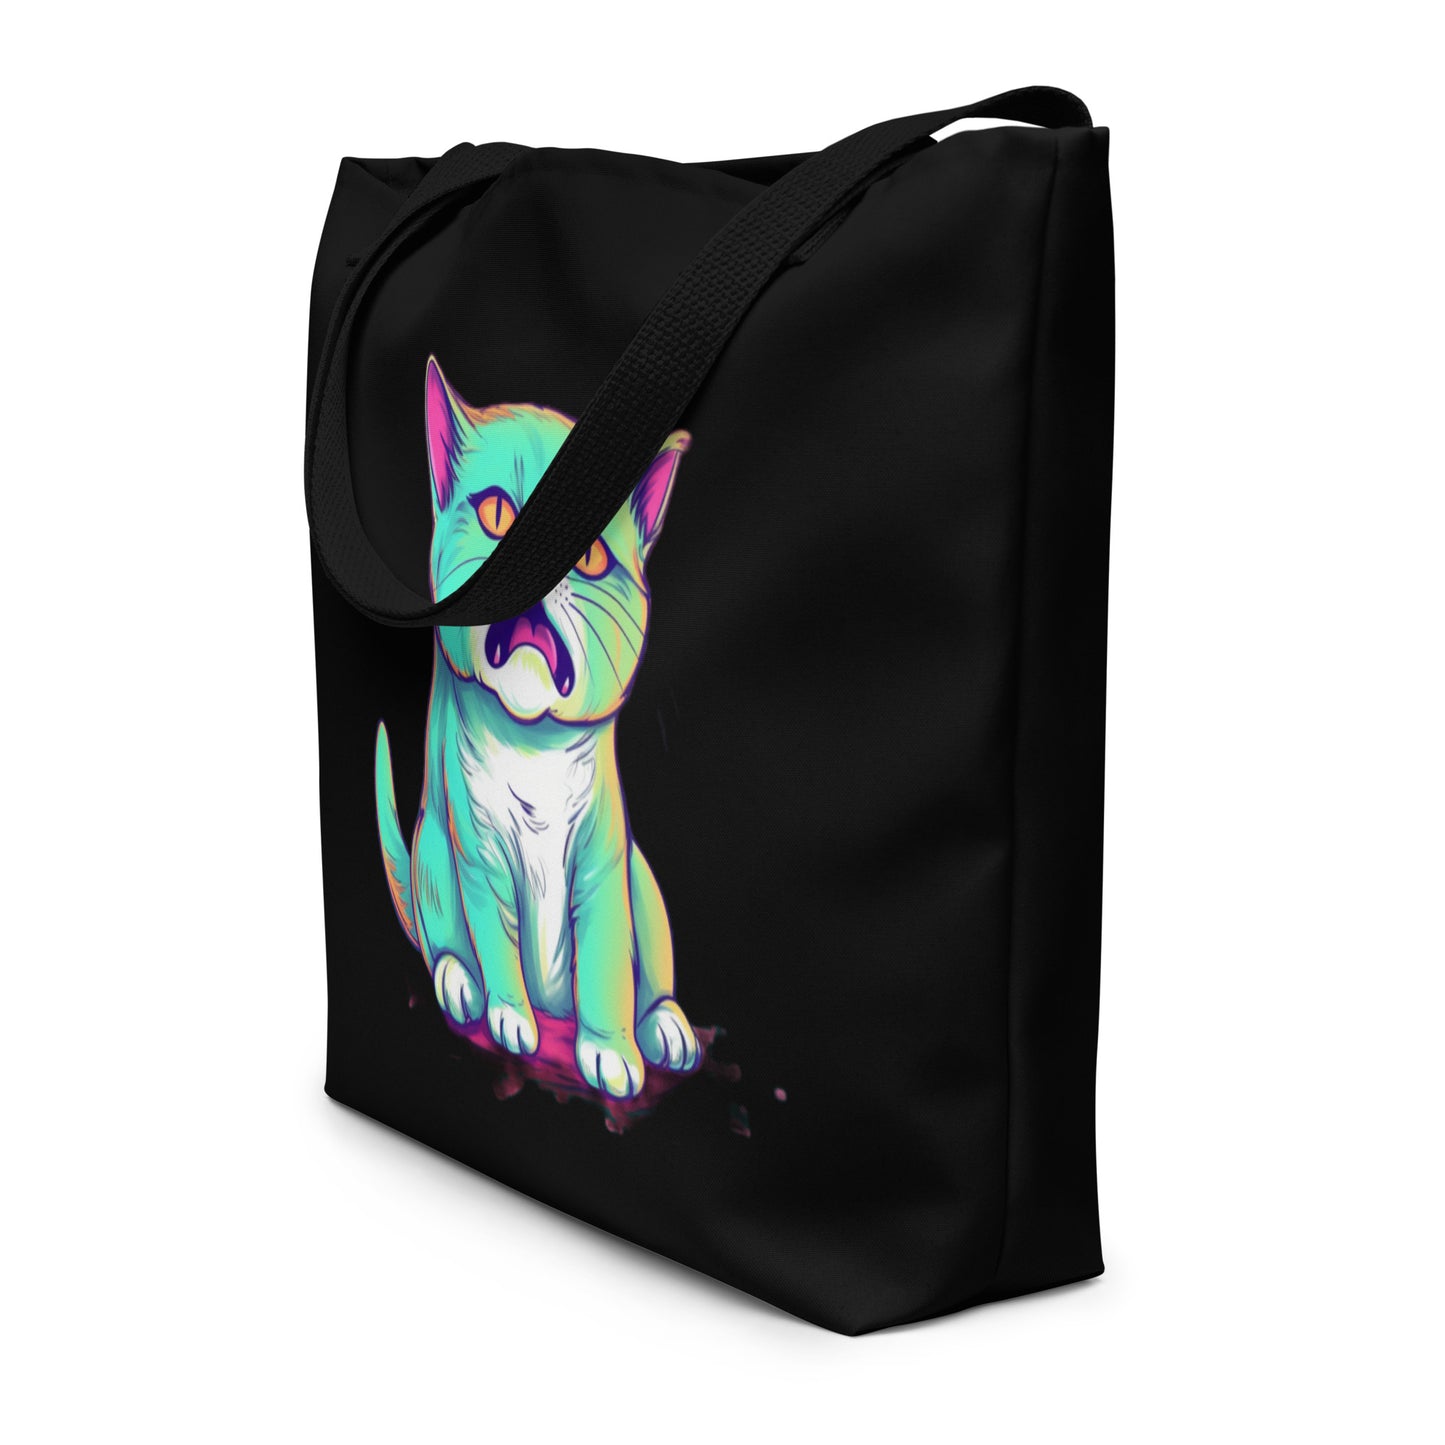 "Come on... Cat"  Large Tote Bag